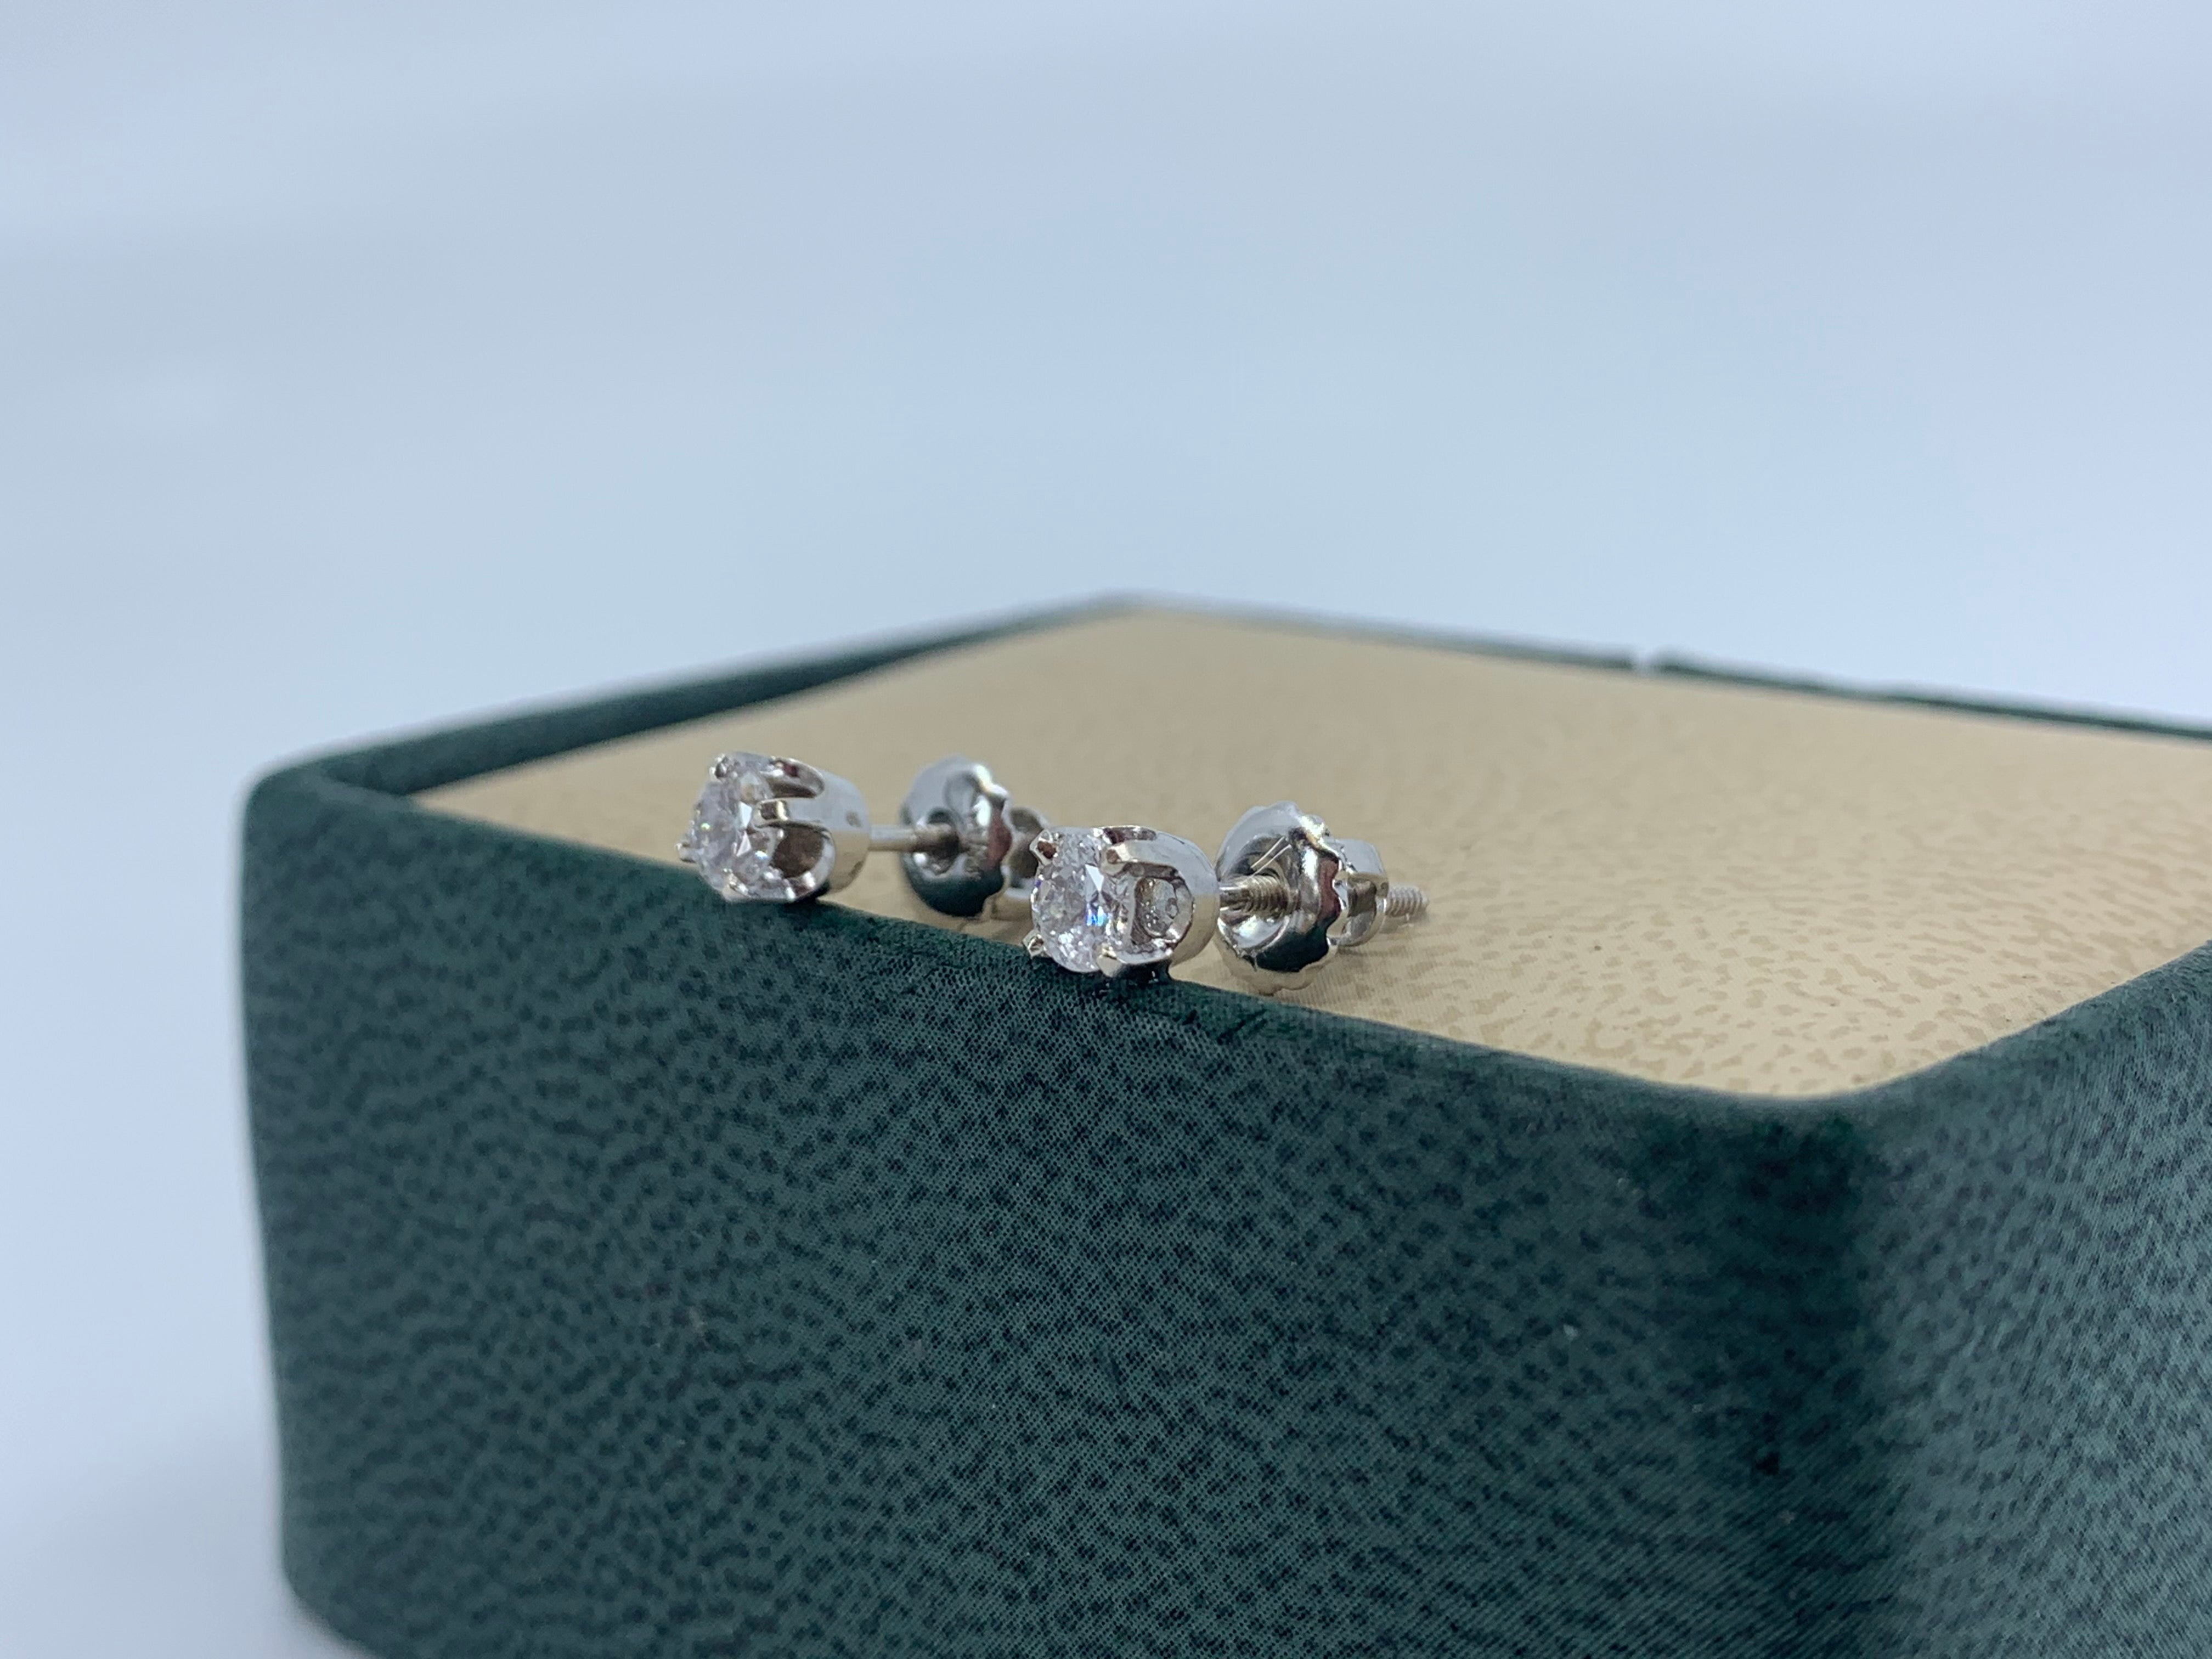 14K White Gold Diamond Studs .41 Carat Total Weight with Screw Back Post